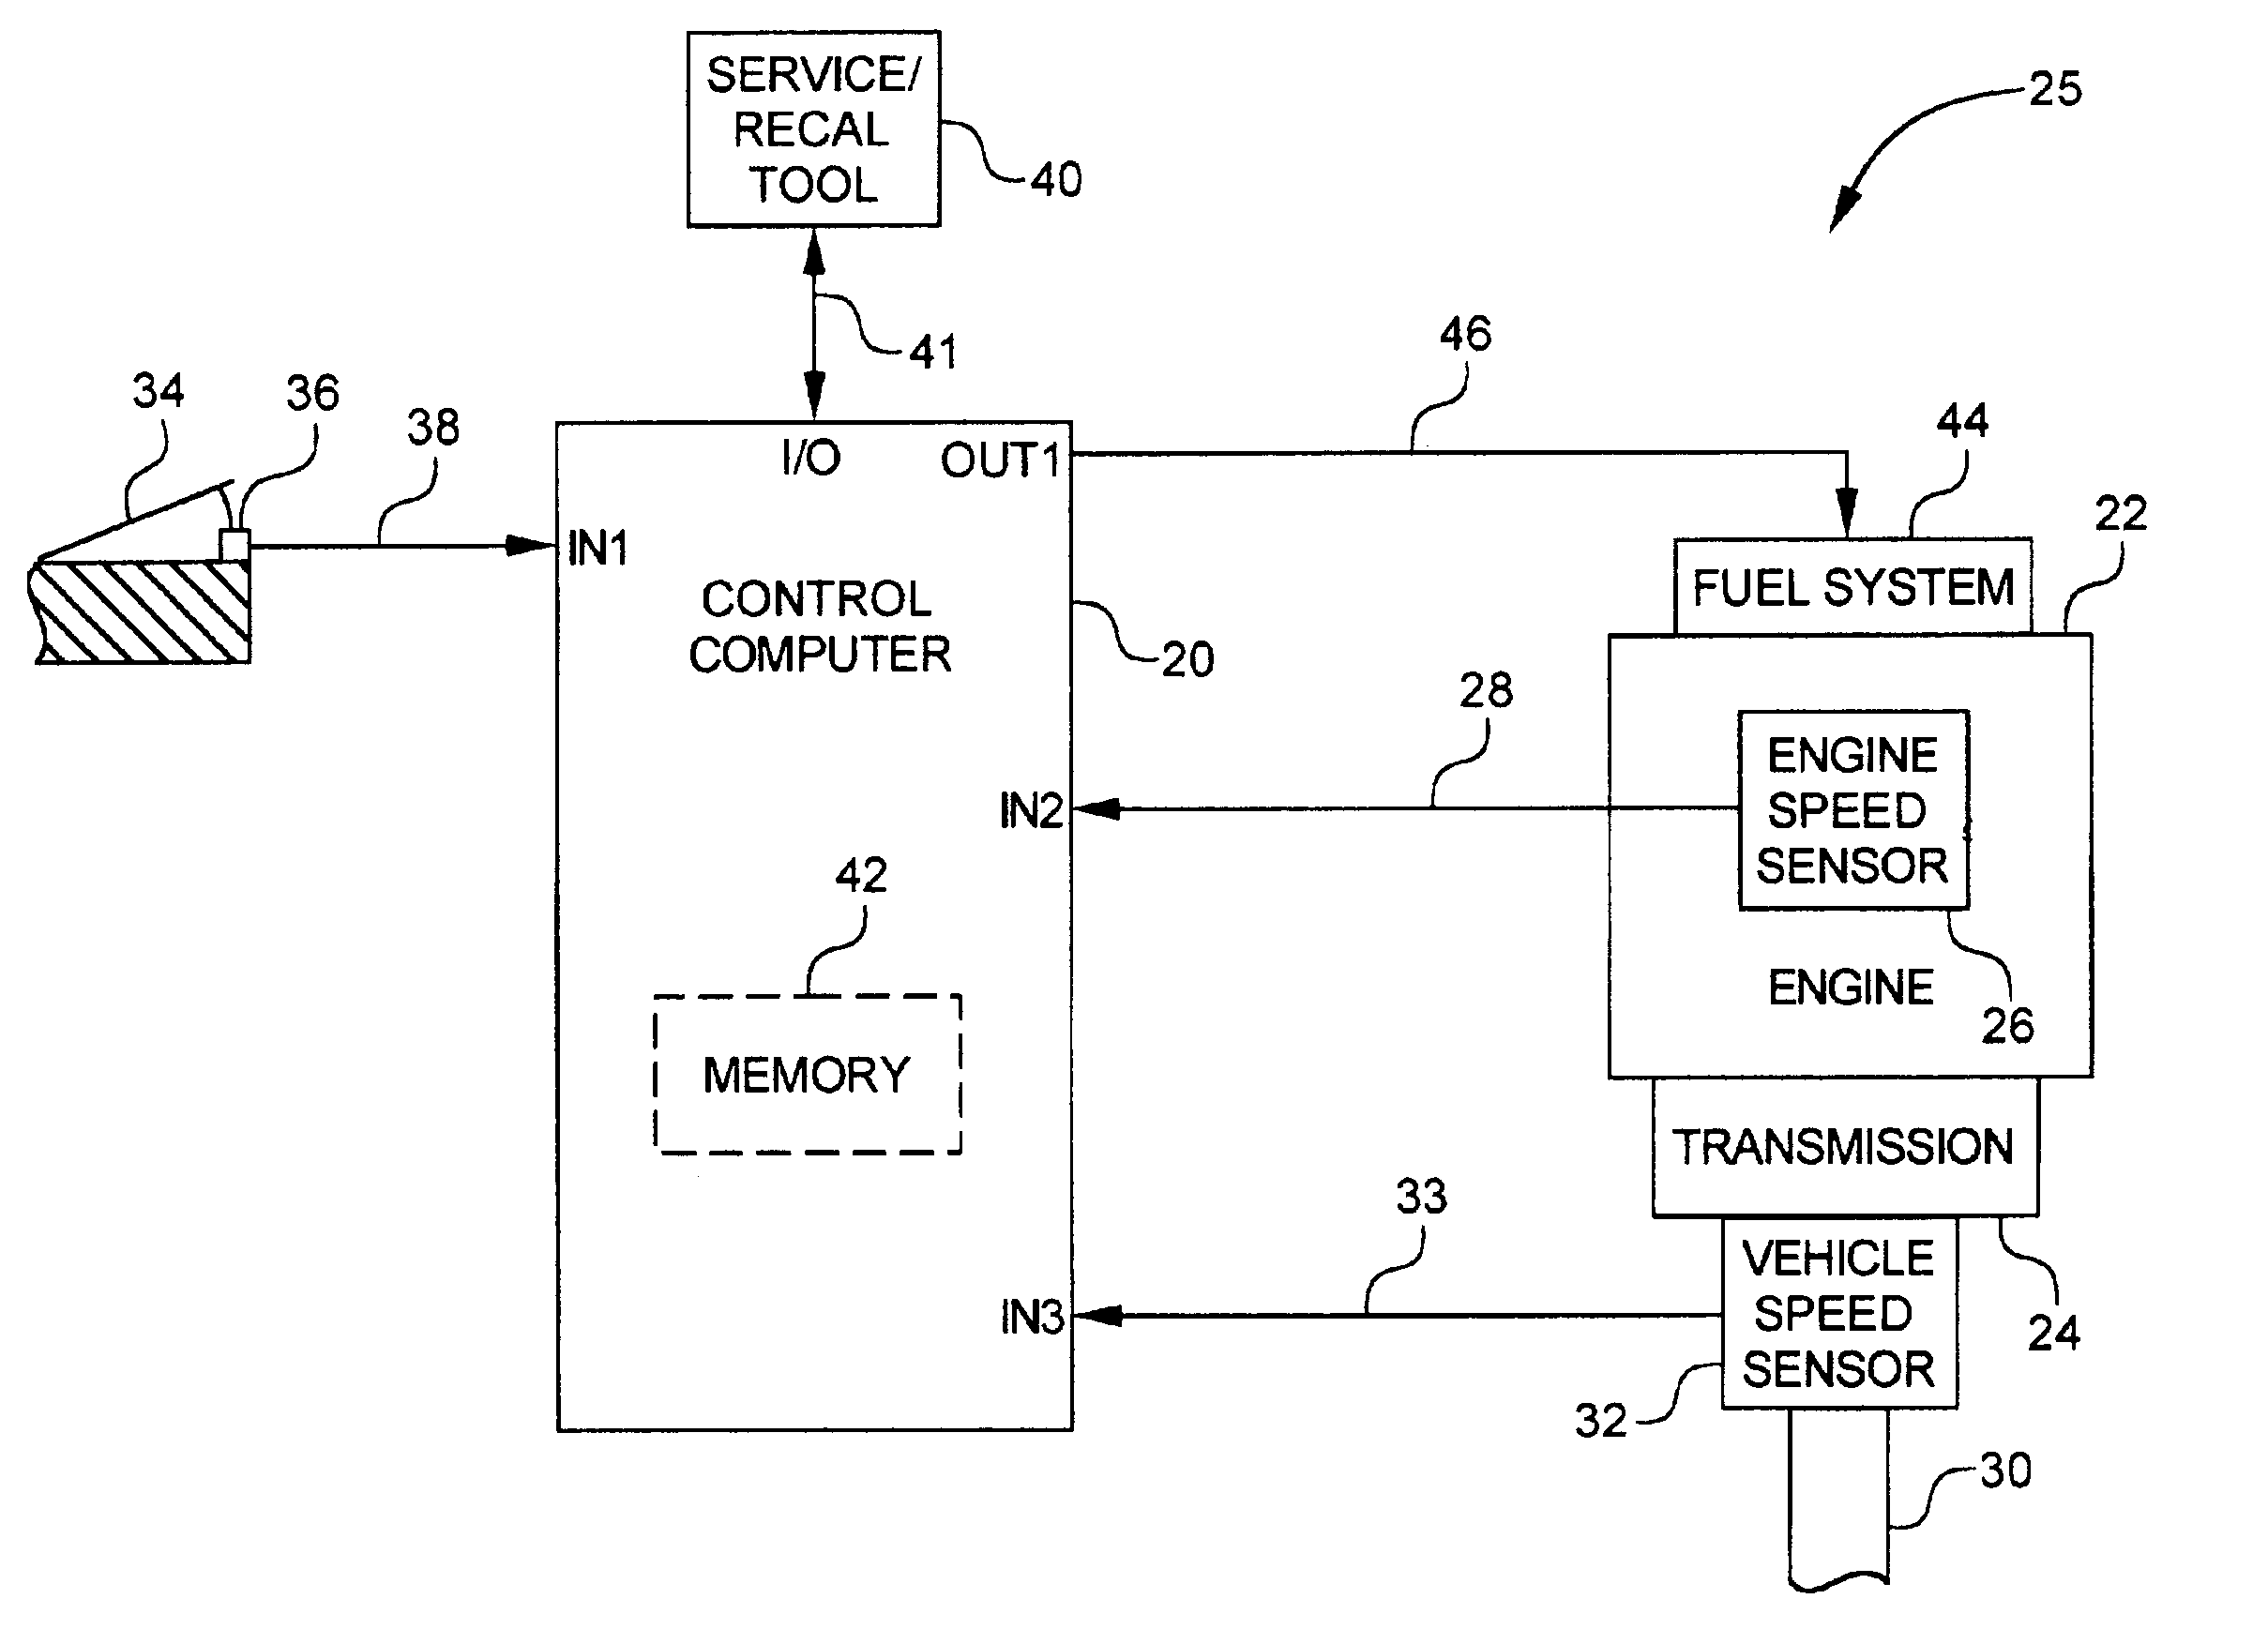 System for controlling an internal combustion engine in a fuel efficient manner